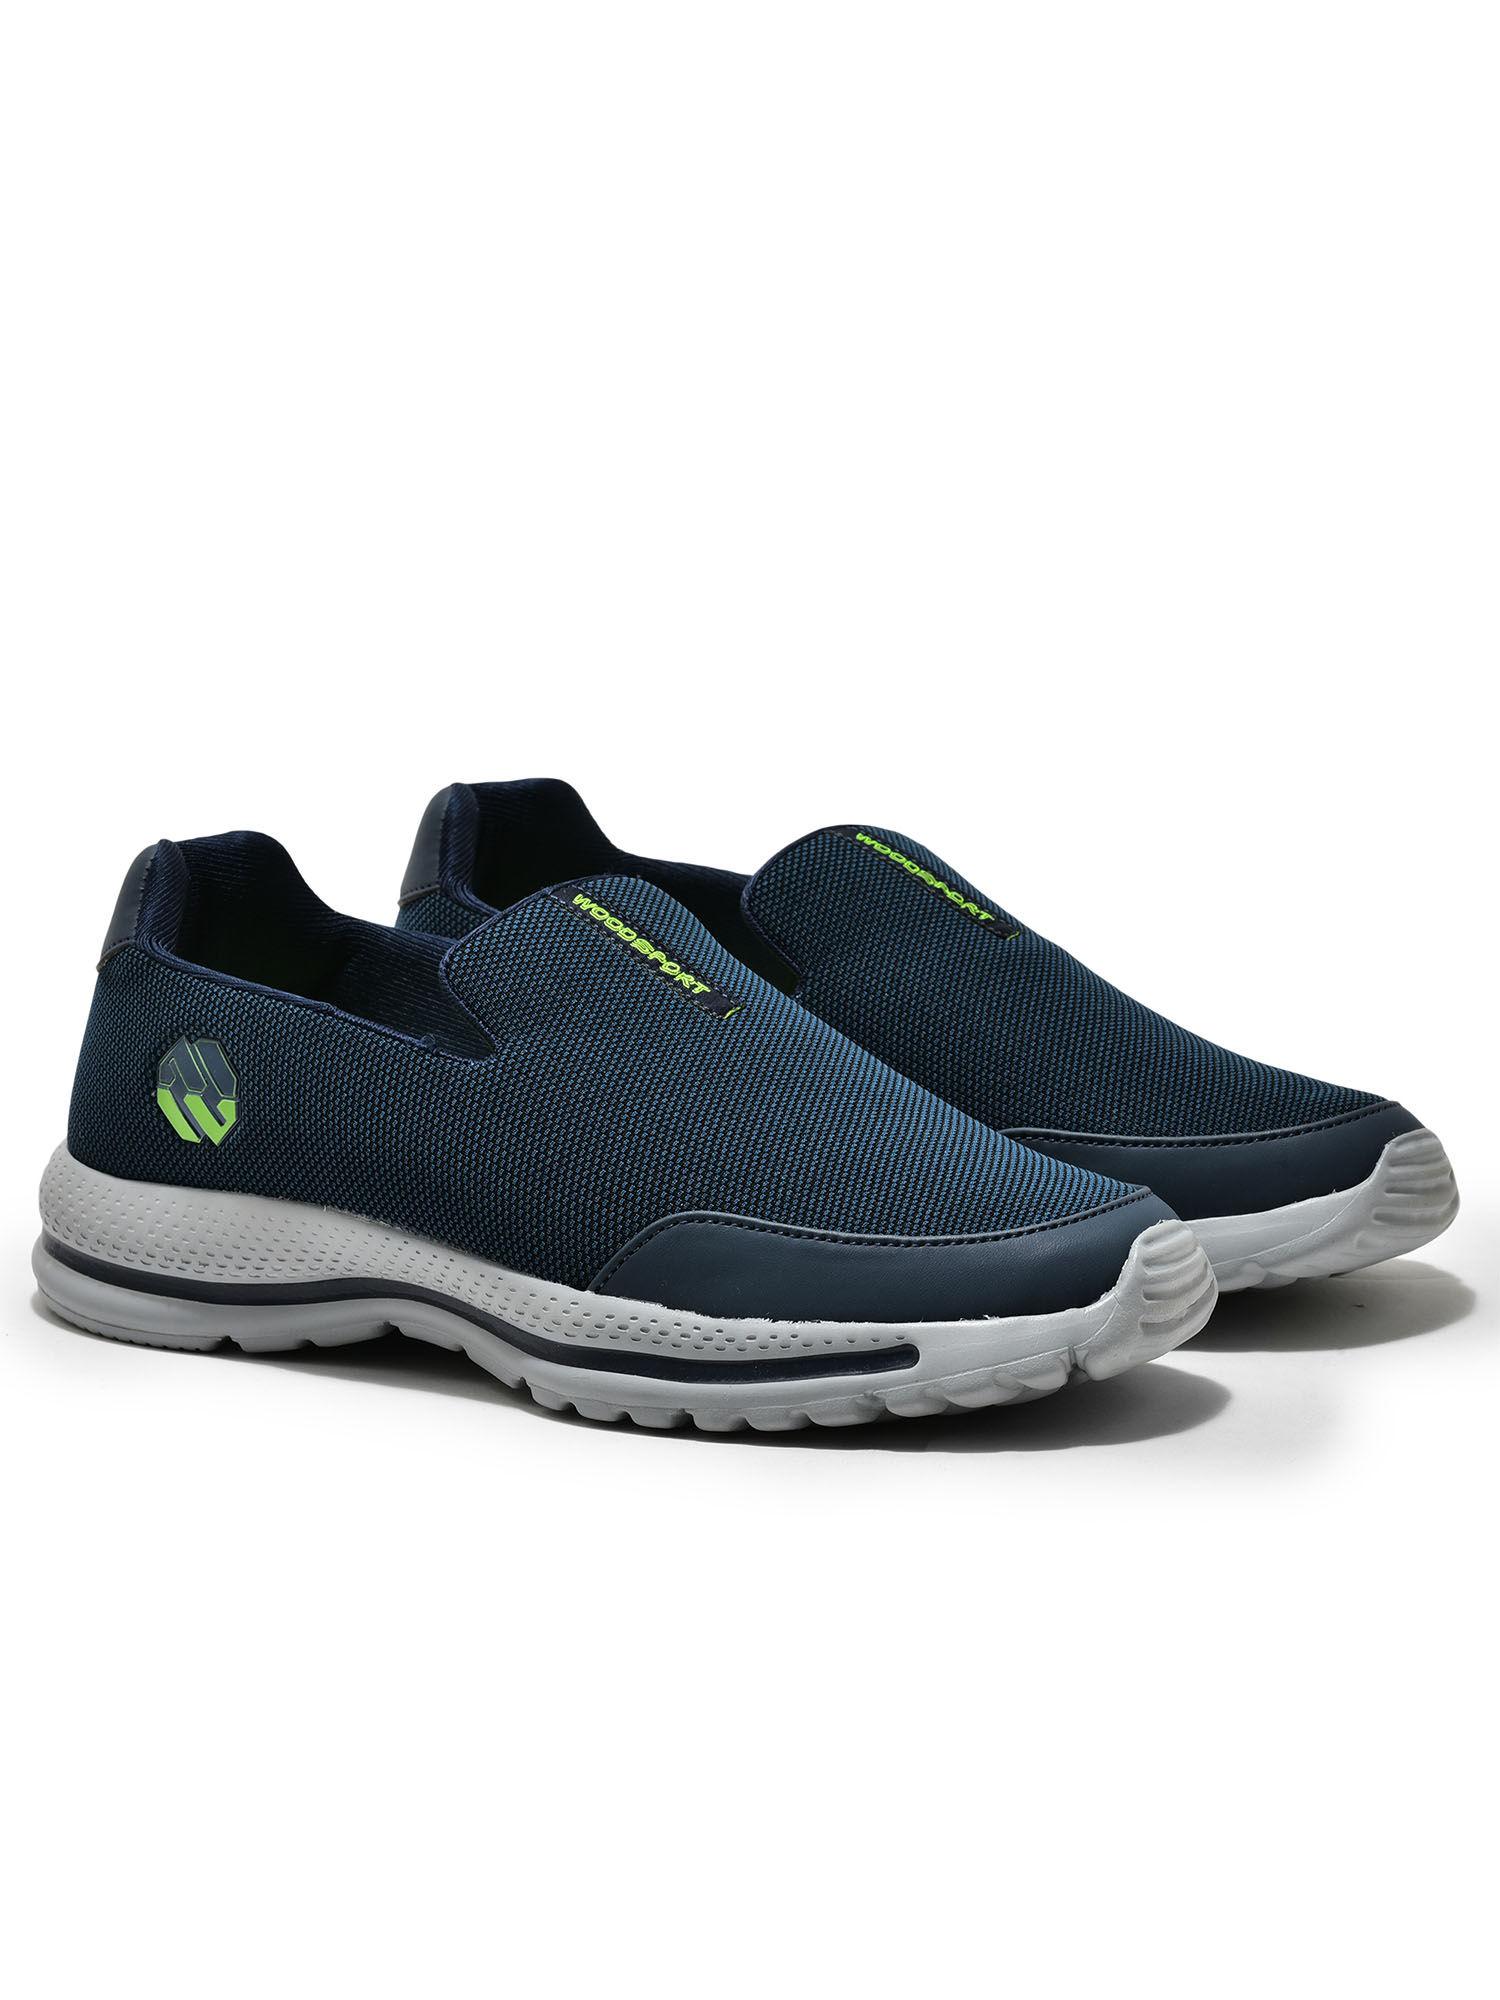 mens navy slip on textured sports shoes